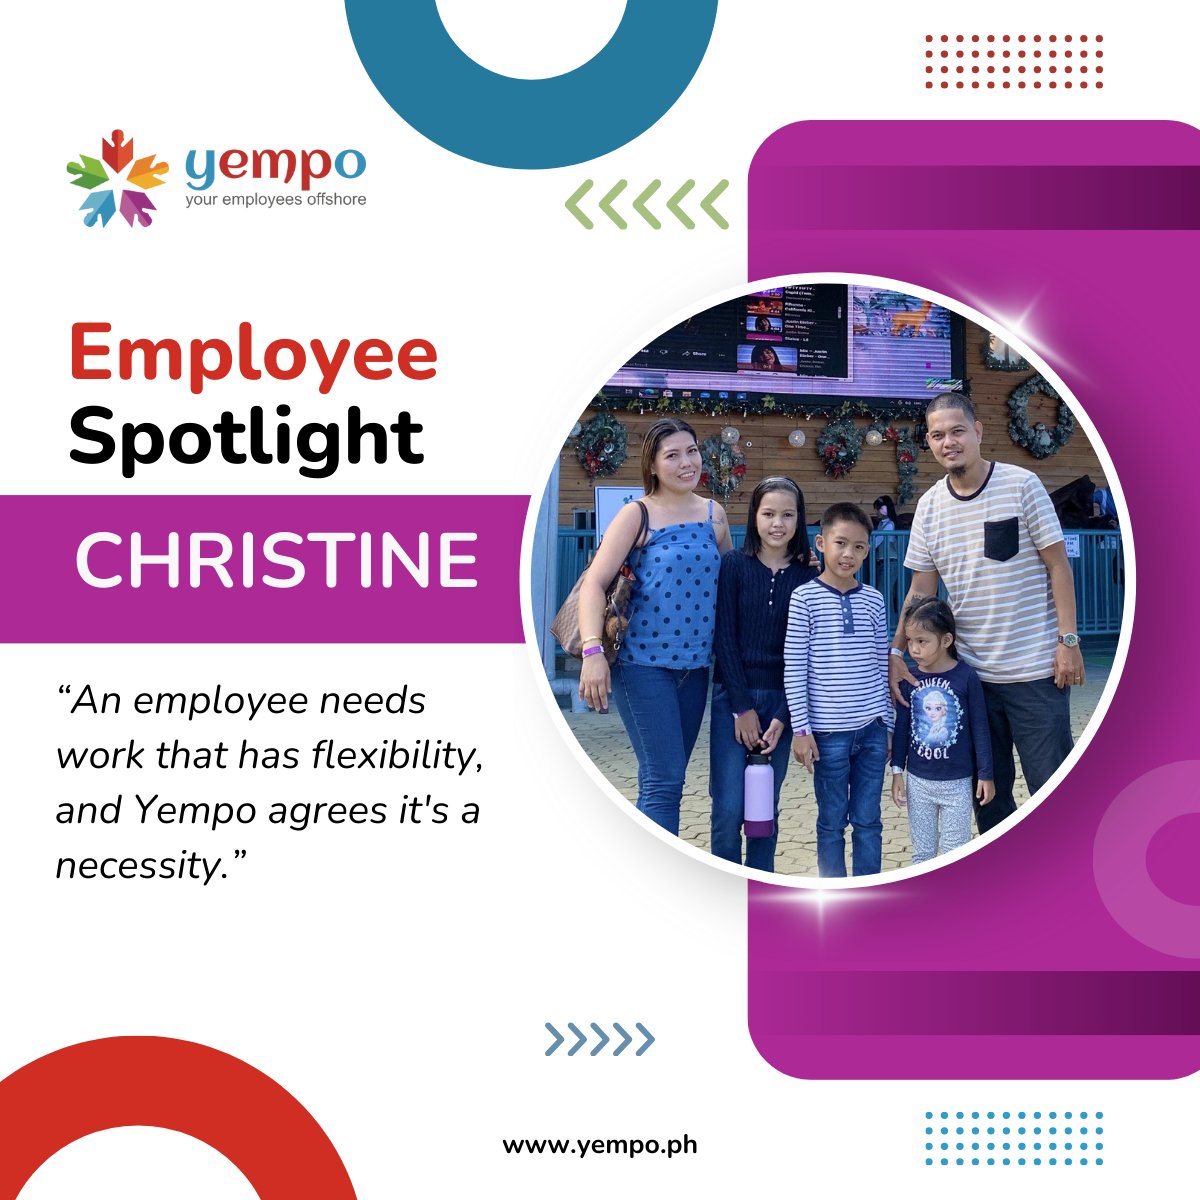 Meet Christine and read what she has to say about working with Yempo!

Join our team now: yempo.ph

#EmployeeHighlight #WorkWithYempo